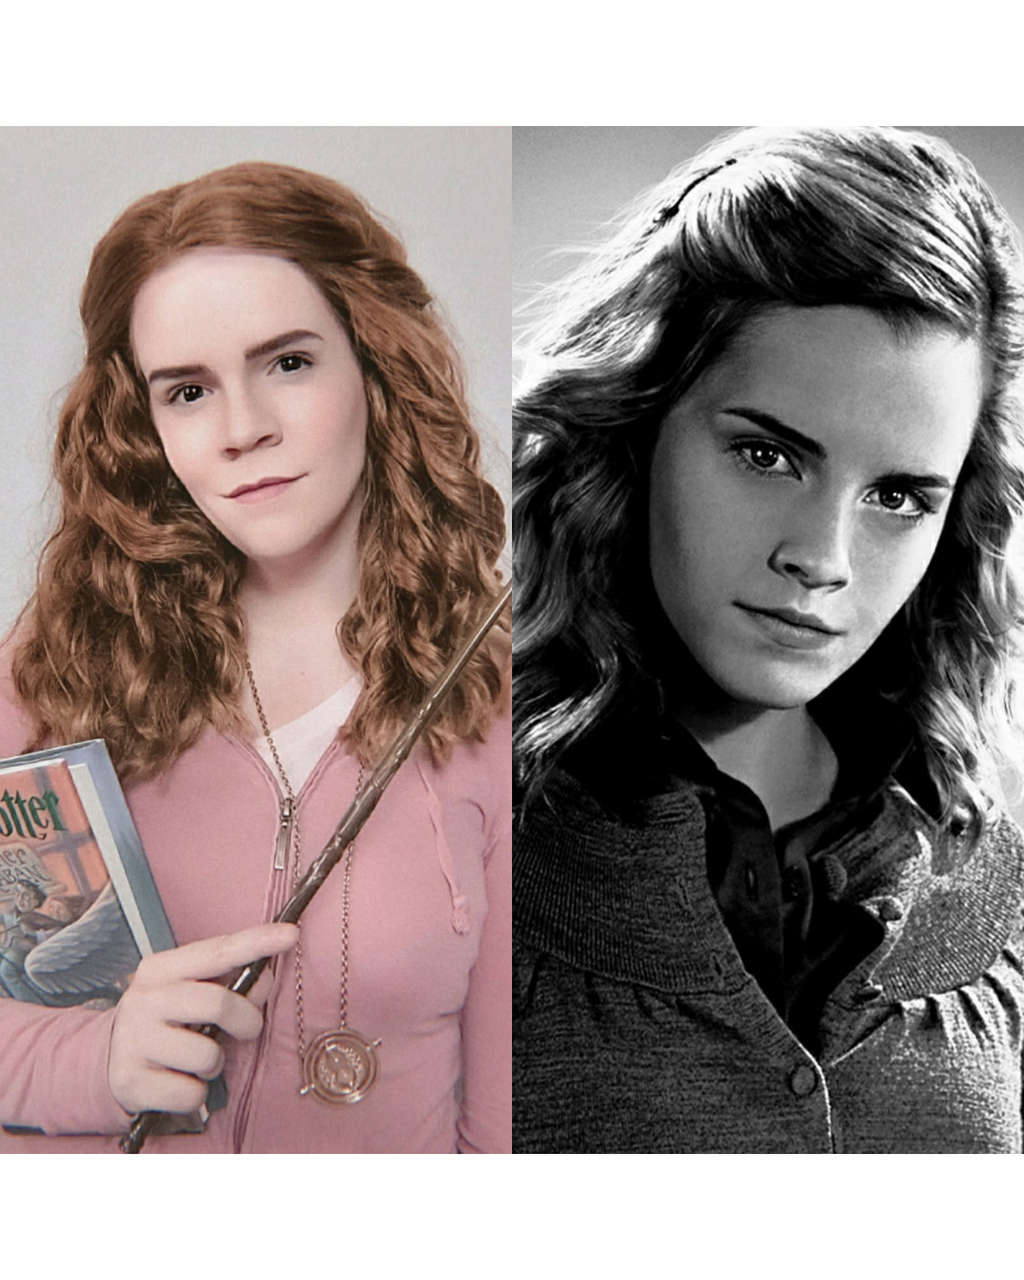 Side By Side Of My Hermione Granger Cosplay Cosplayer Karielle